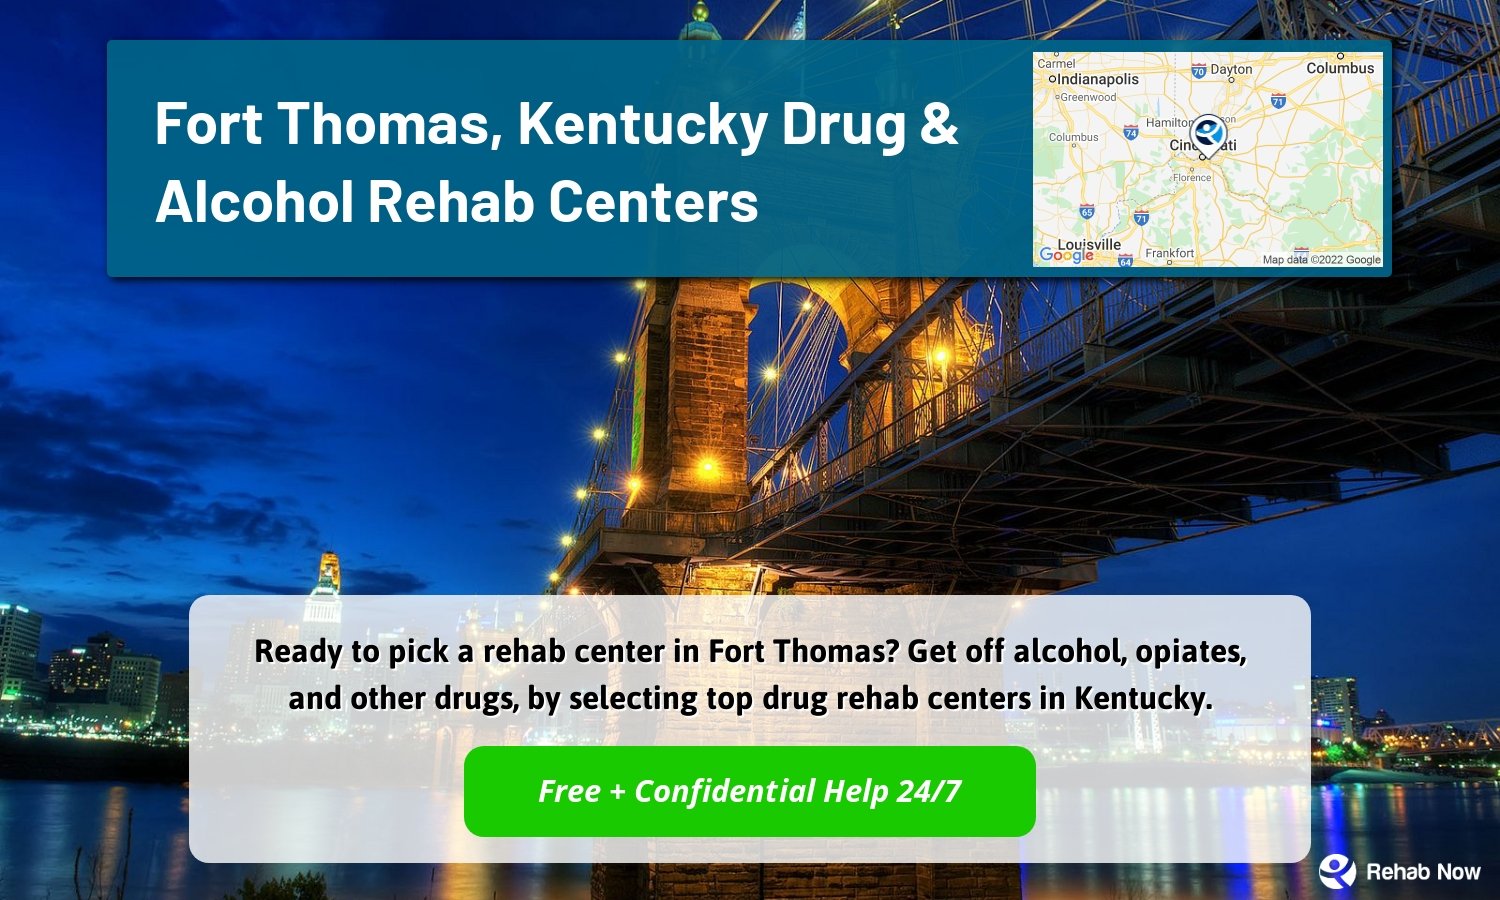 Ready to pick a rehab center in Fort Thomas? Get off alcohol, opiates, and other drugs, by selecting top drug rehab centers in Kentucky.